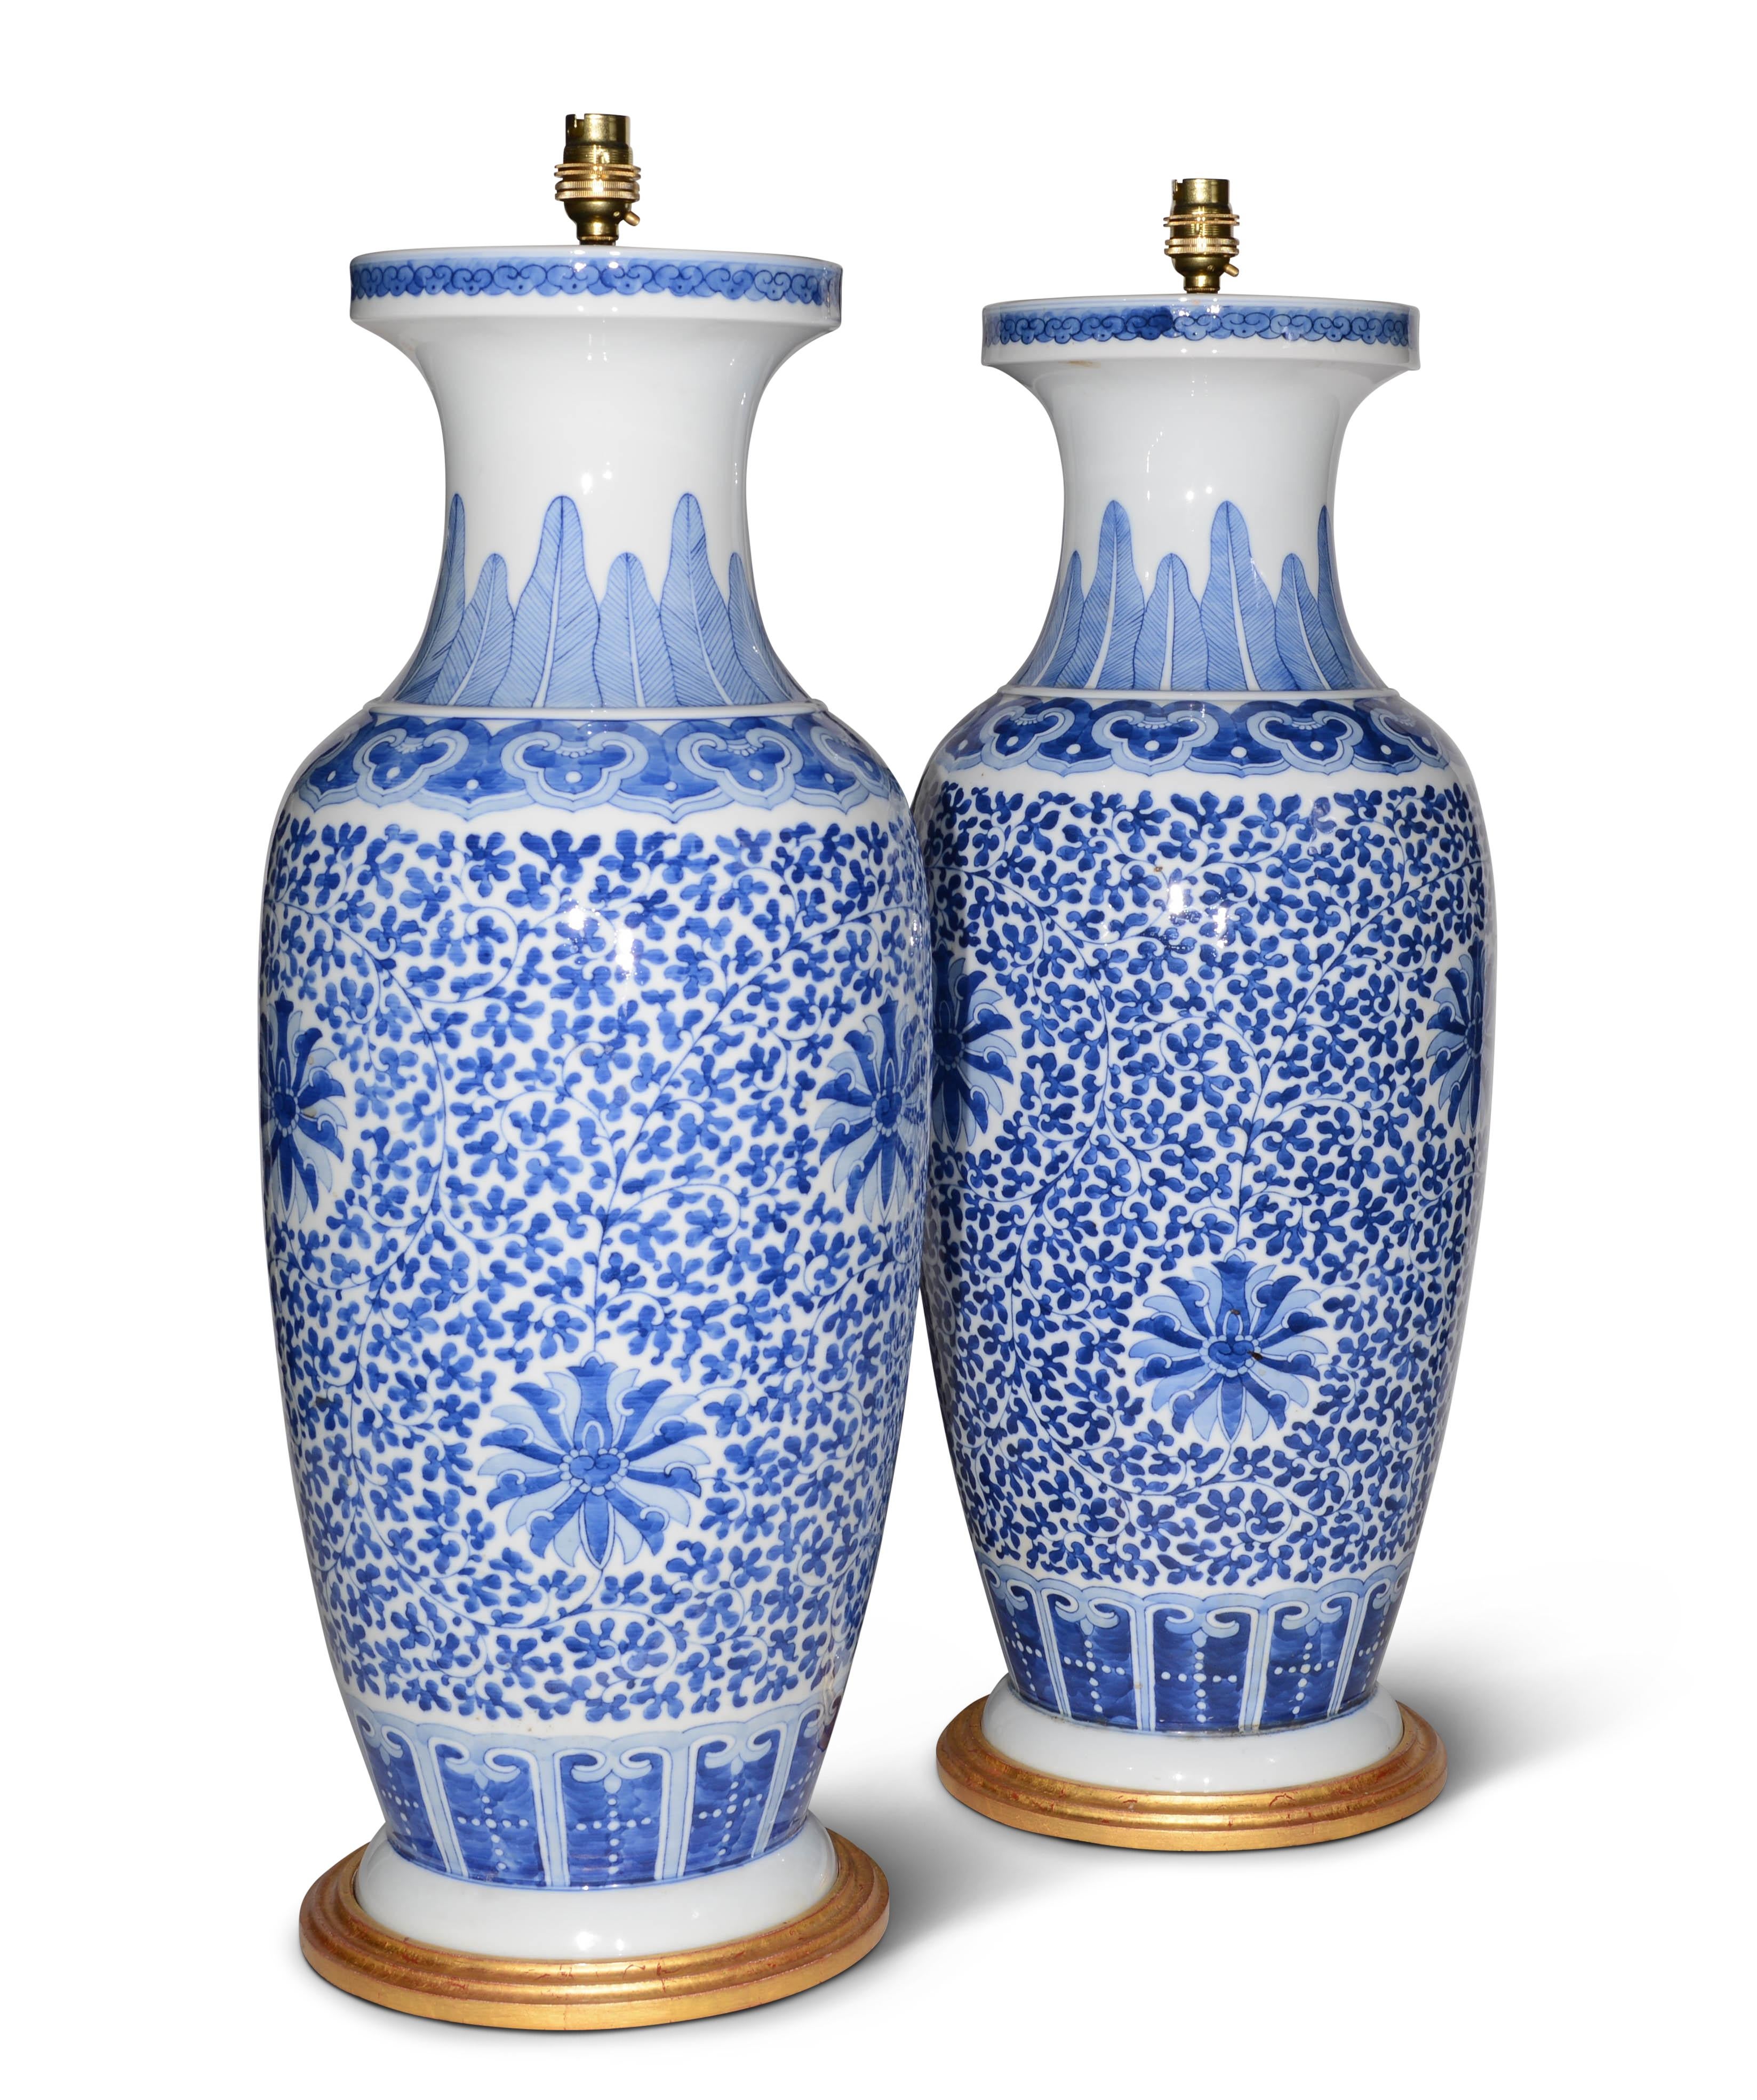 A fine pair of large Chinese blue and white baluster vases, decorated in tones of blue and whites in the Kangxi manner, now mounted as lamps with hand gilded turned bases.

Height of vases: 24 1/4 in (62 cm) including giltwood bases, excluding